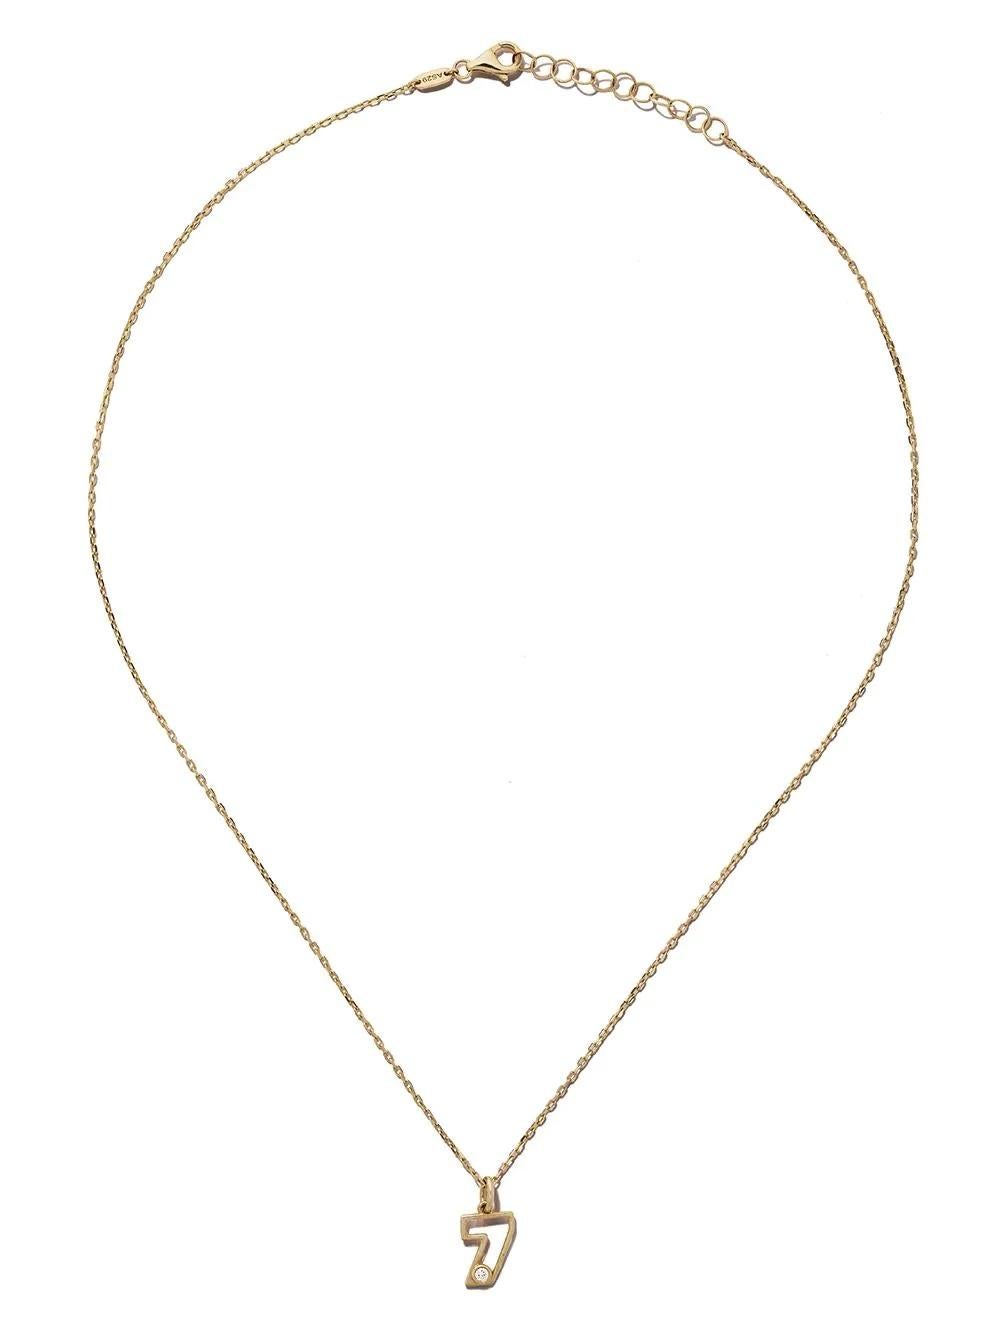 AS29
14kt yellow gold diamond Seven necklace
If seven is your lucky number, this is your lucky day. Boasting a 14k yellow gold construction and adorned with a diamond, this Seven necklace from AS29 will bring you nothing but good vibes. Make your